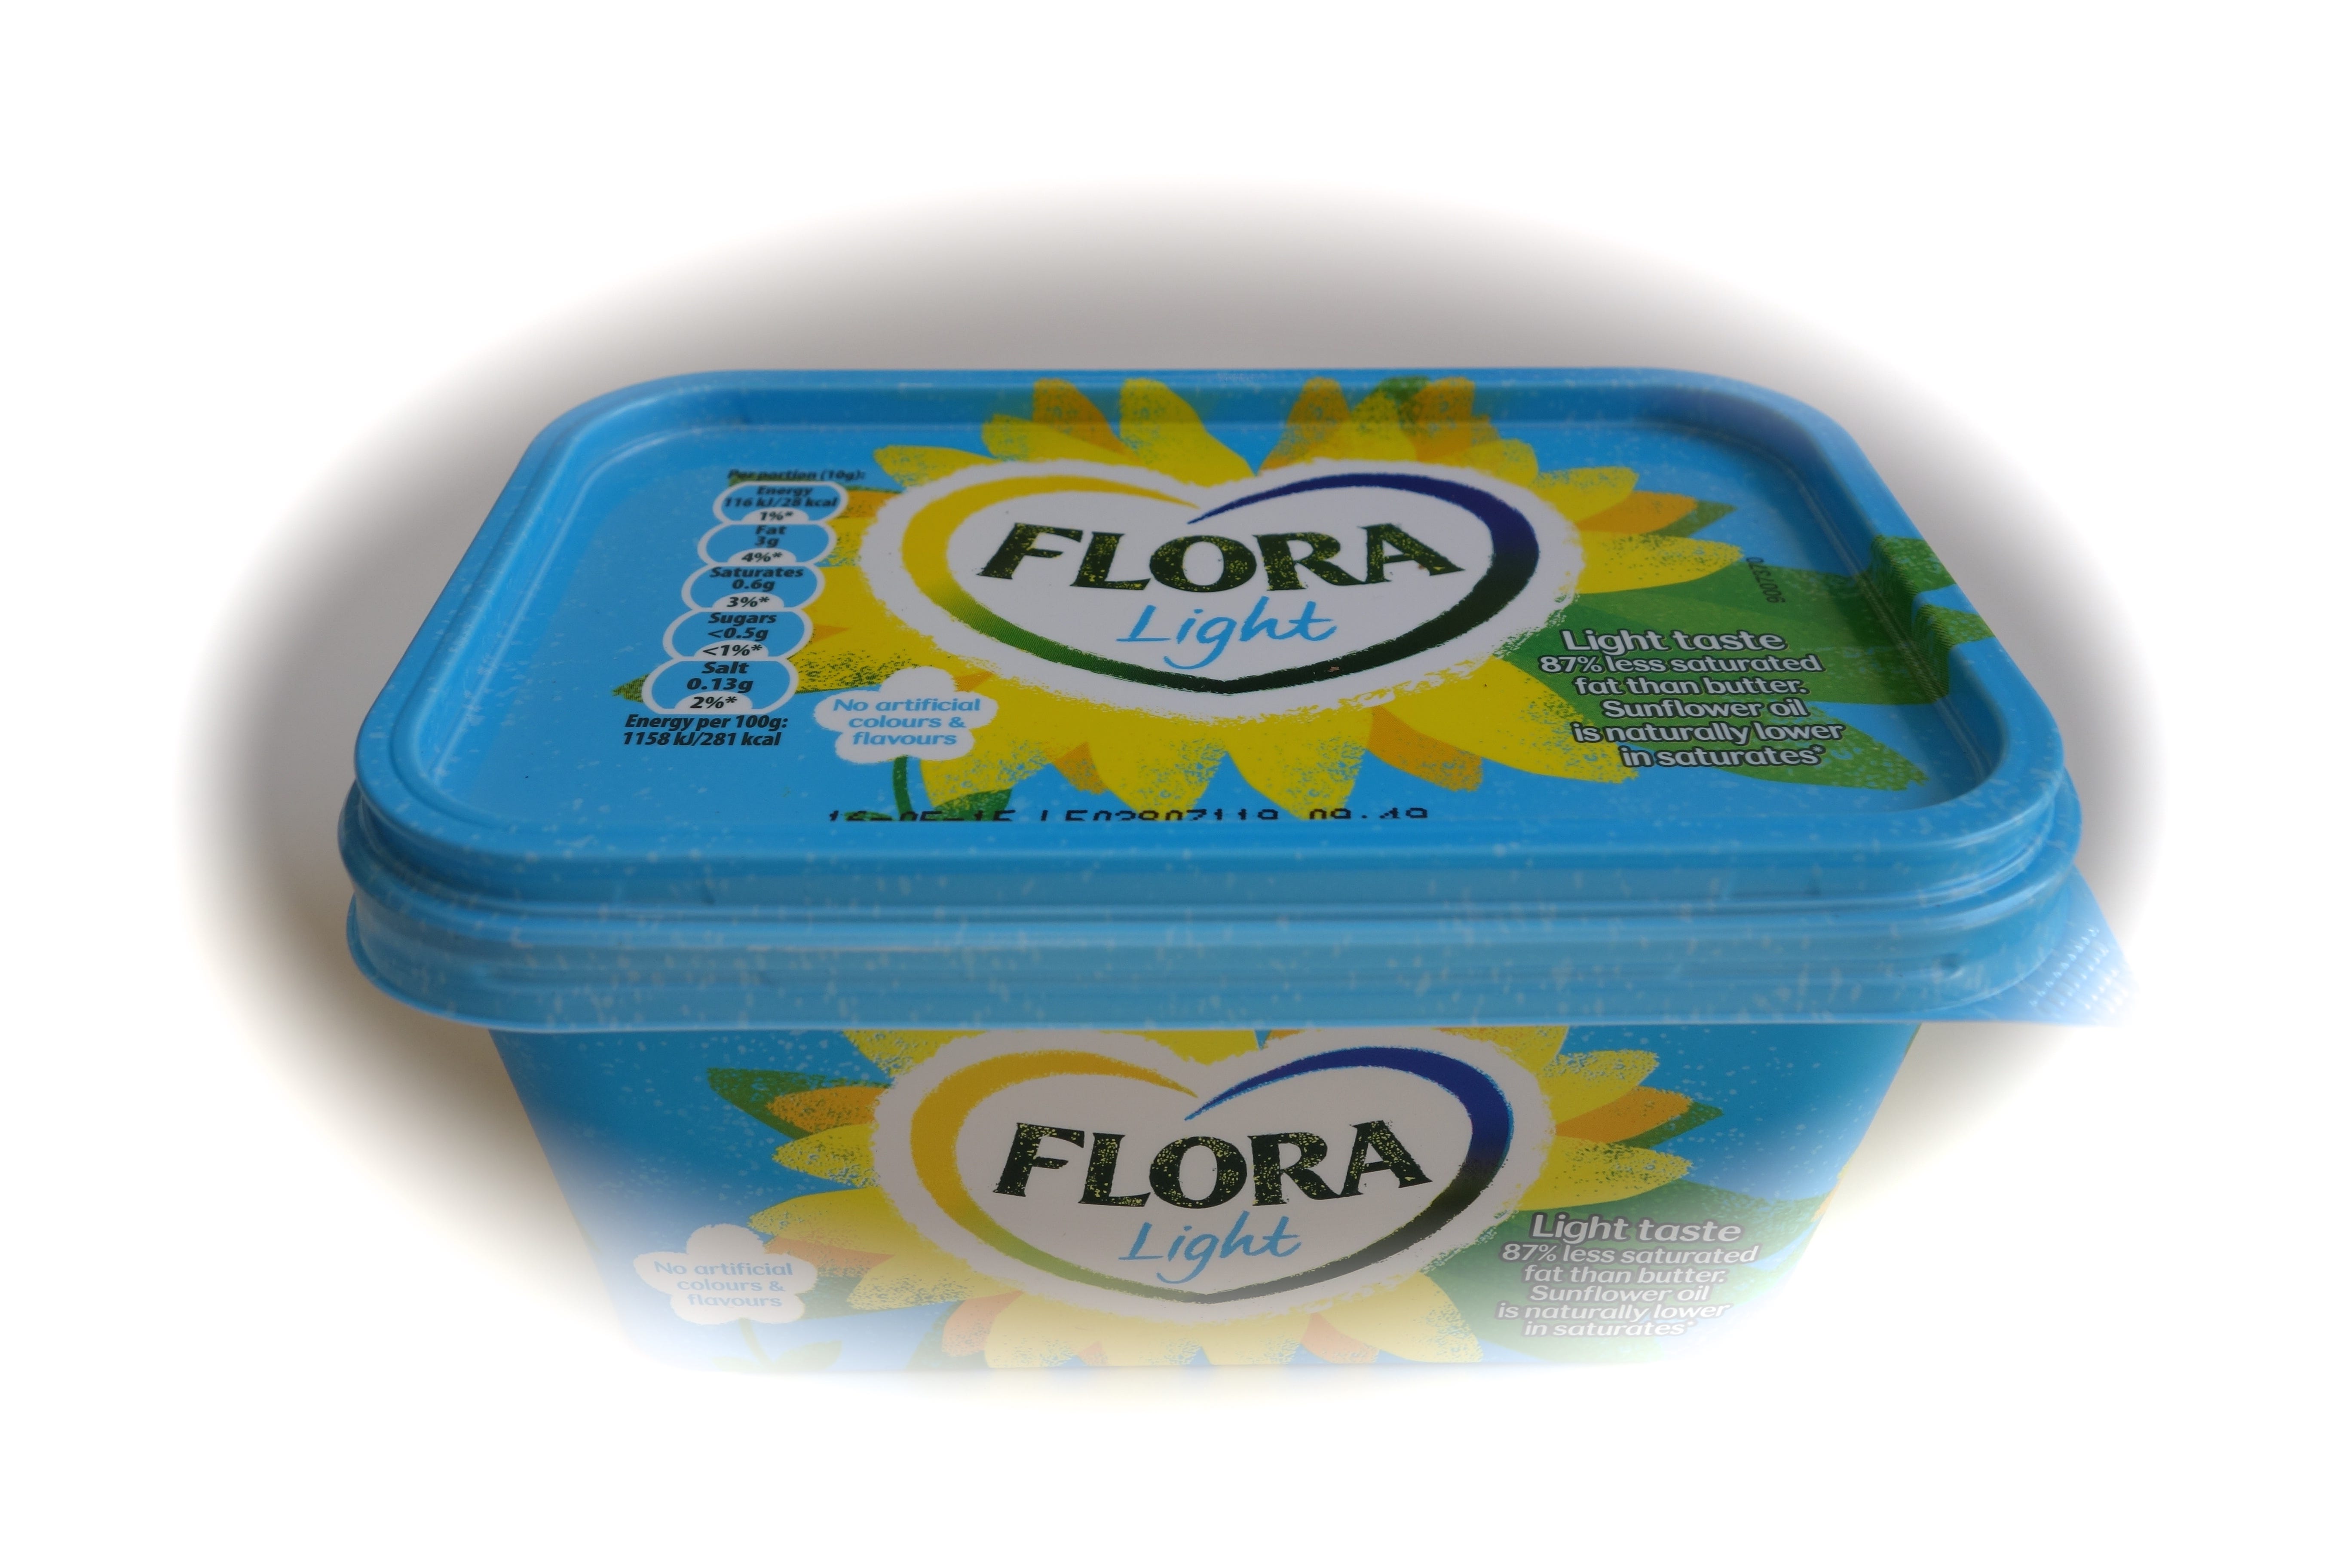 Best Margarine: The Best Tasting Margarine at the Grocery Store